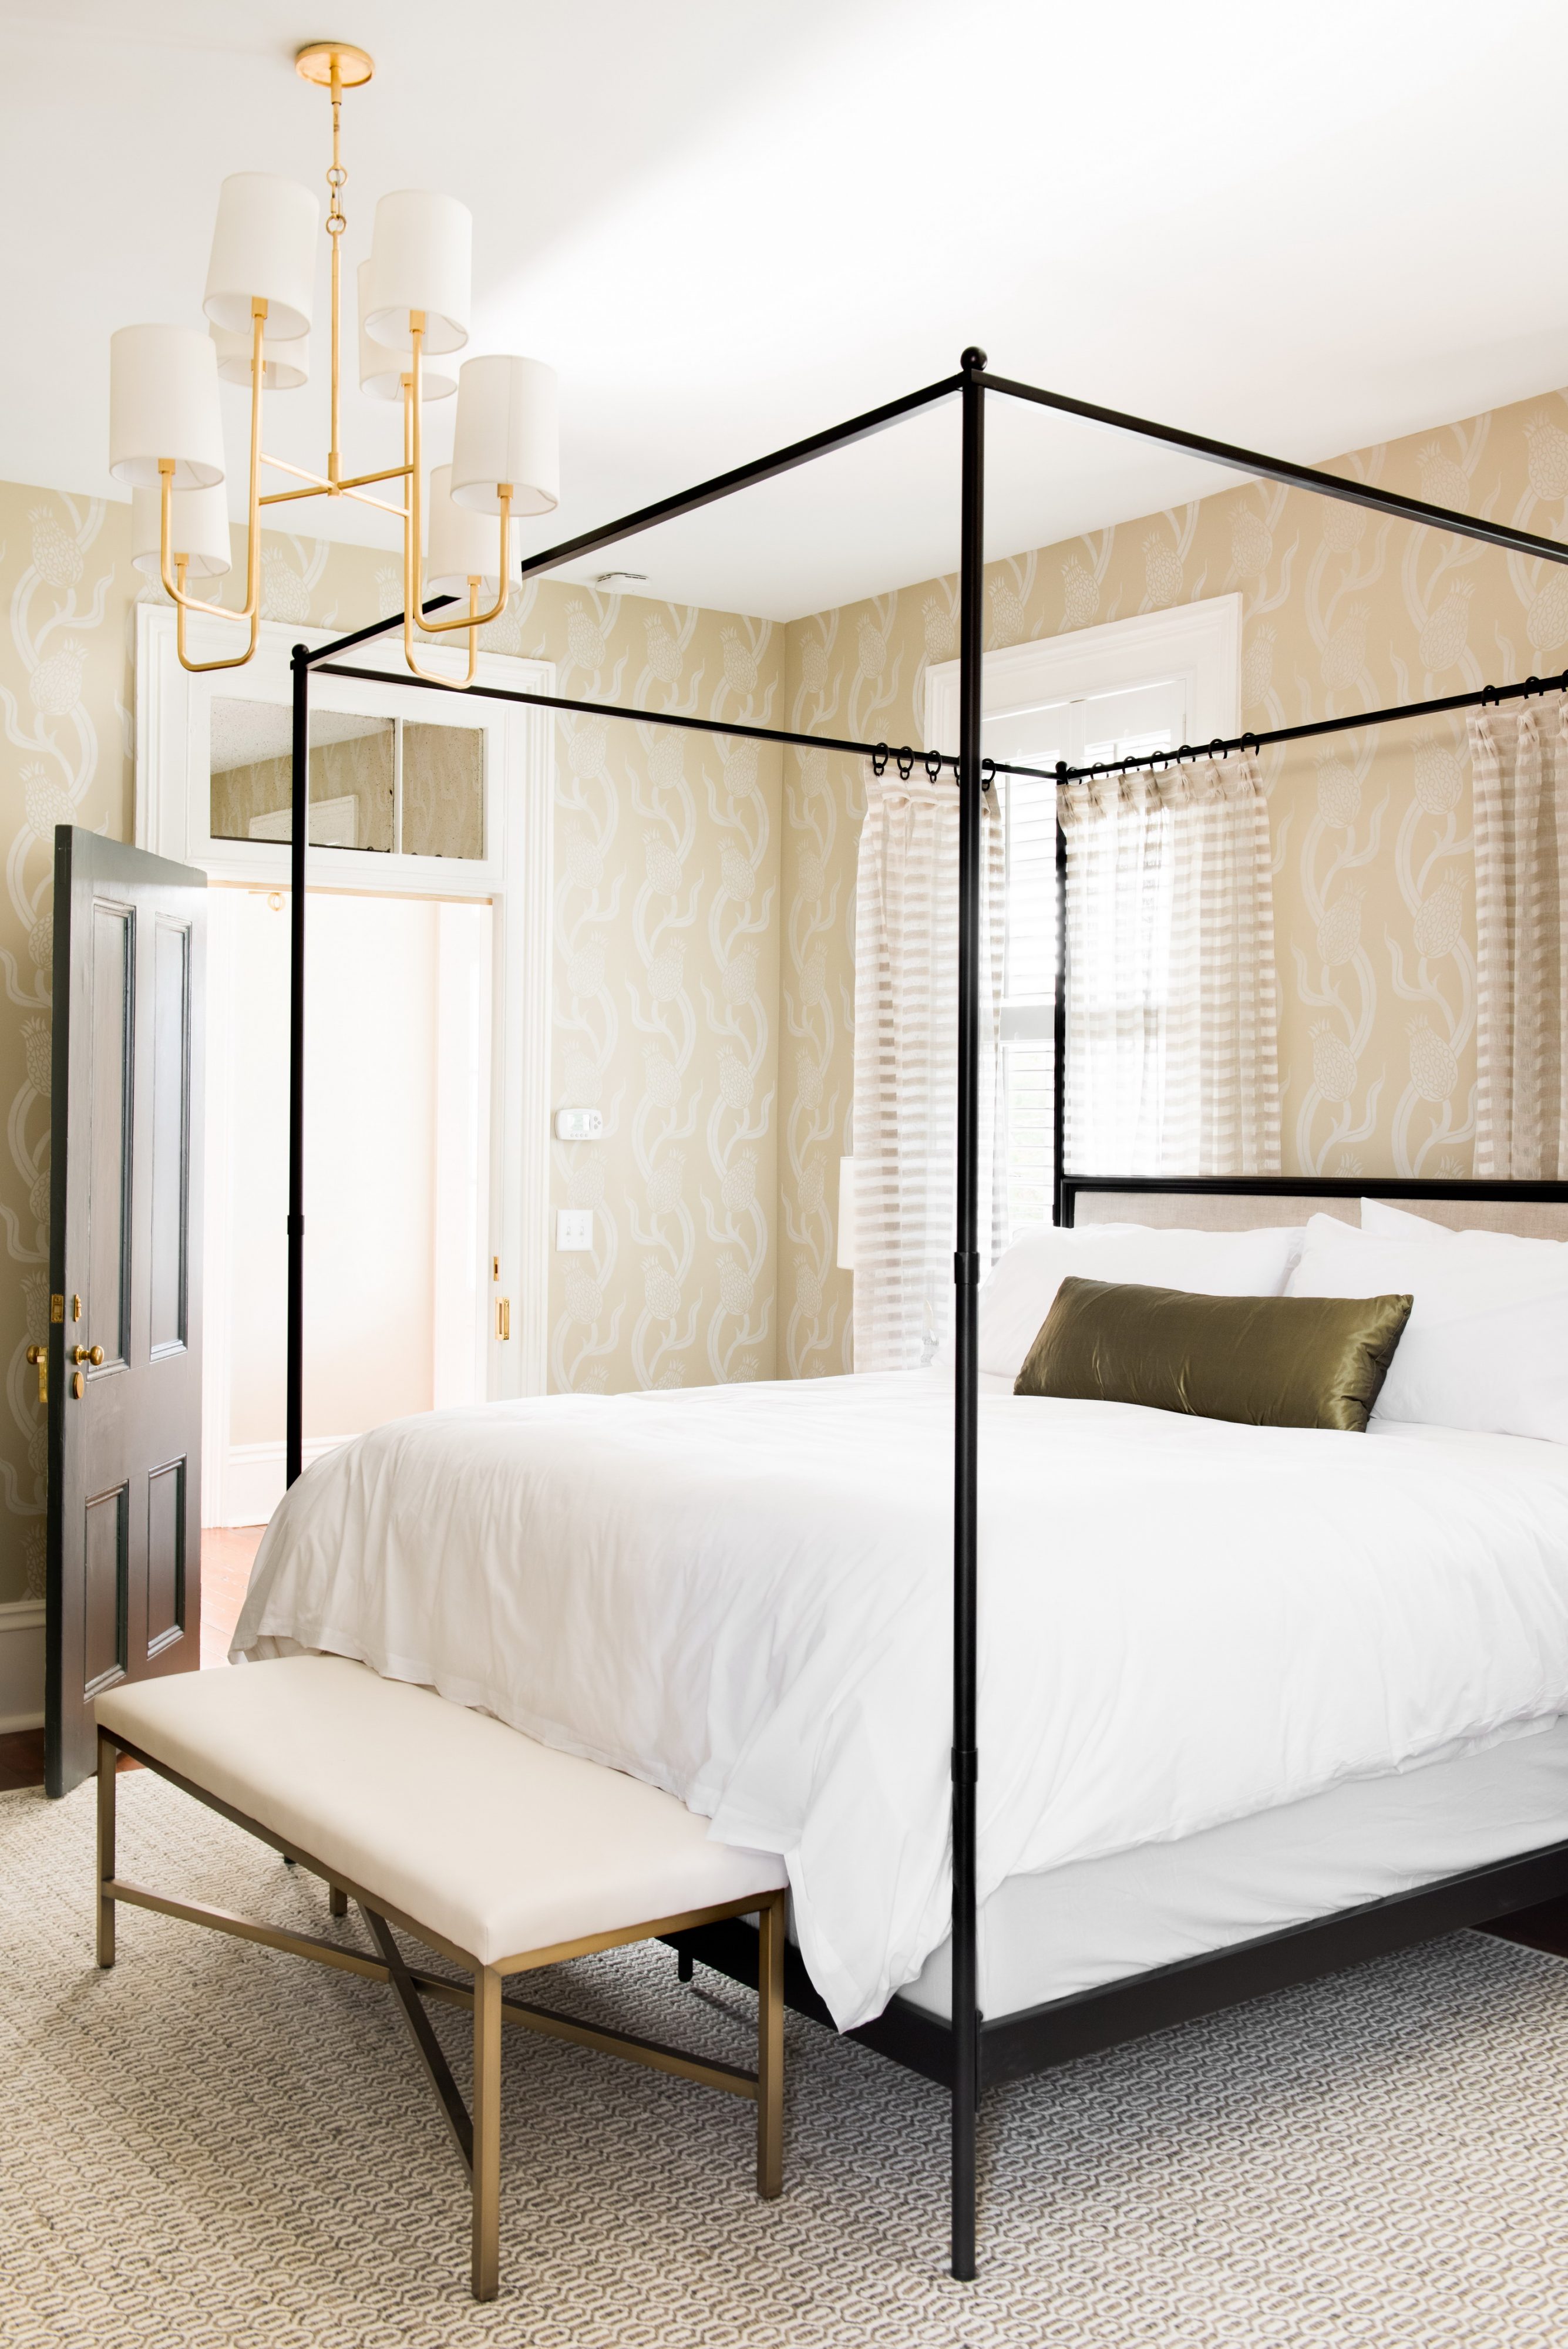 86 Cannon | A Boutique Inn by B. Berry Interiors